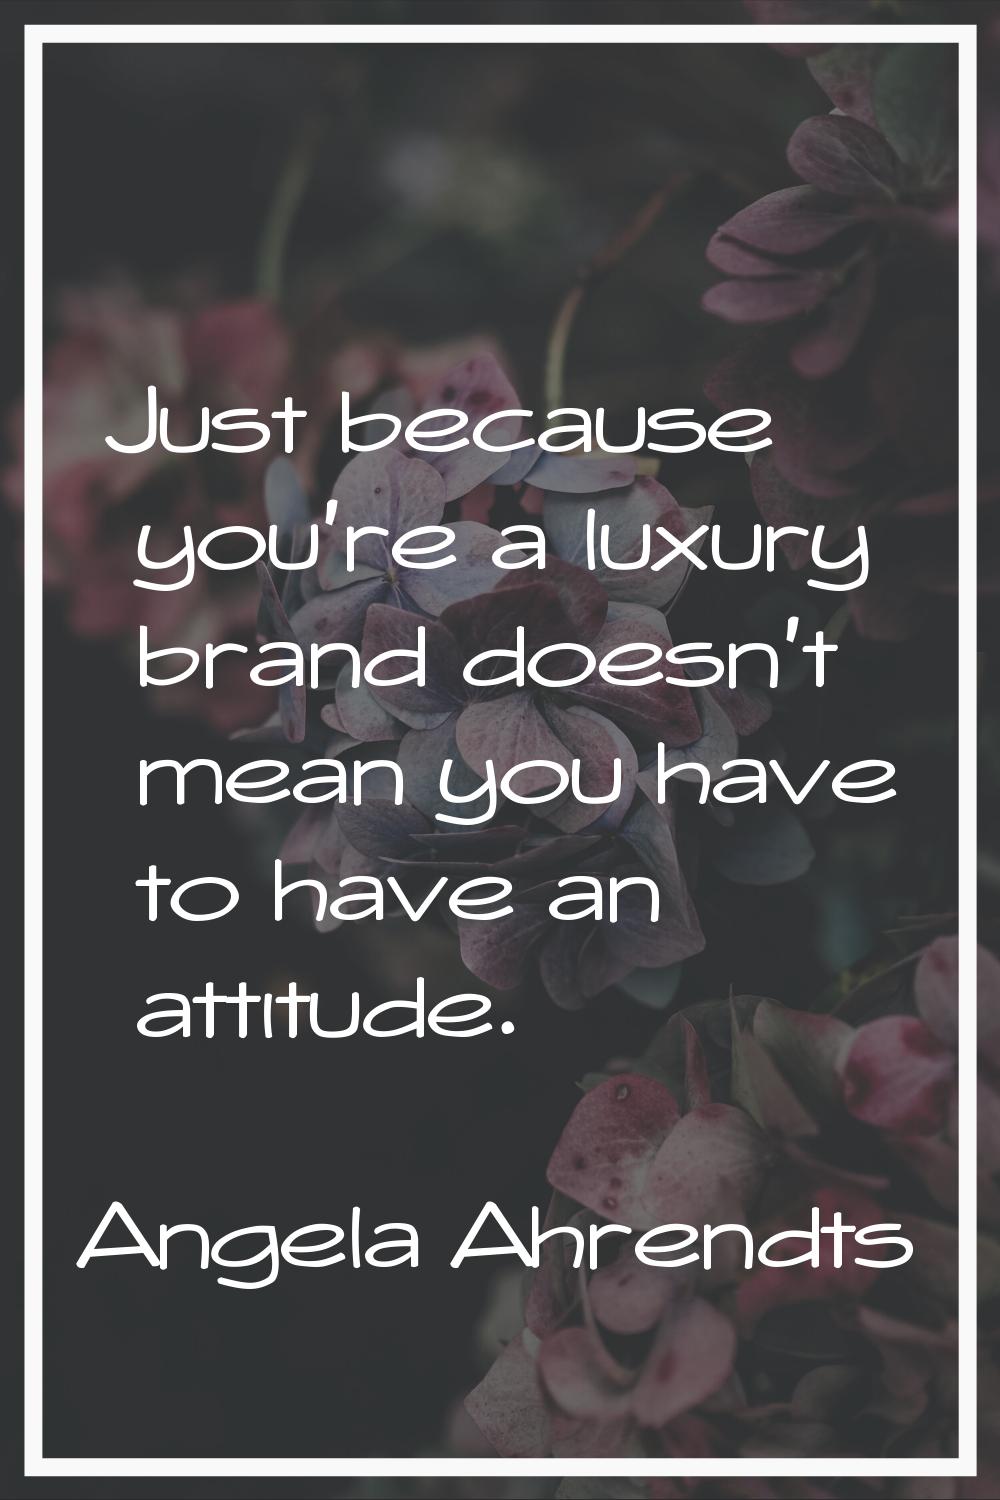 Just because you're a luxury brand doesn't mean you have to have an attitude.